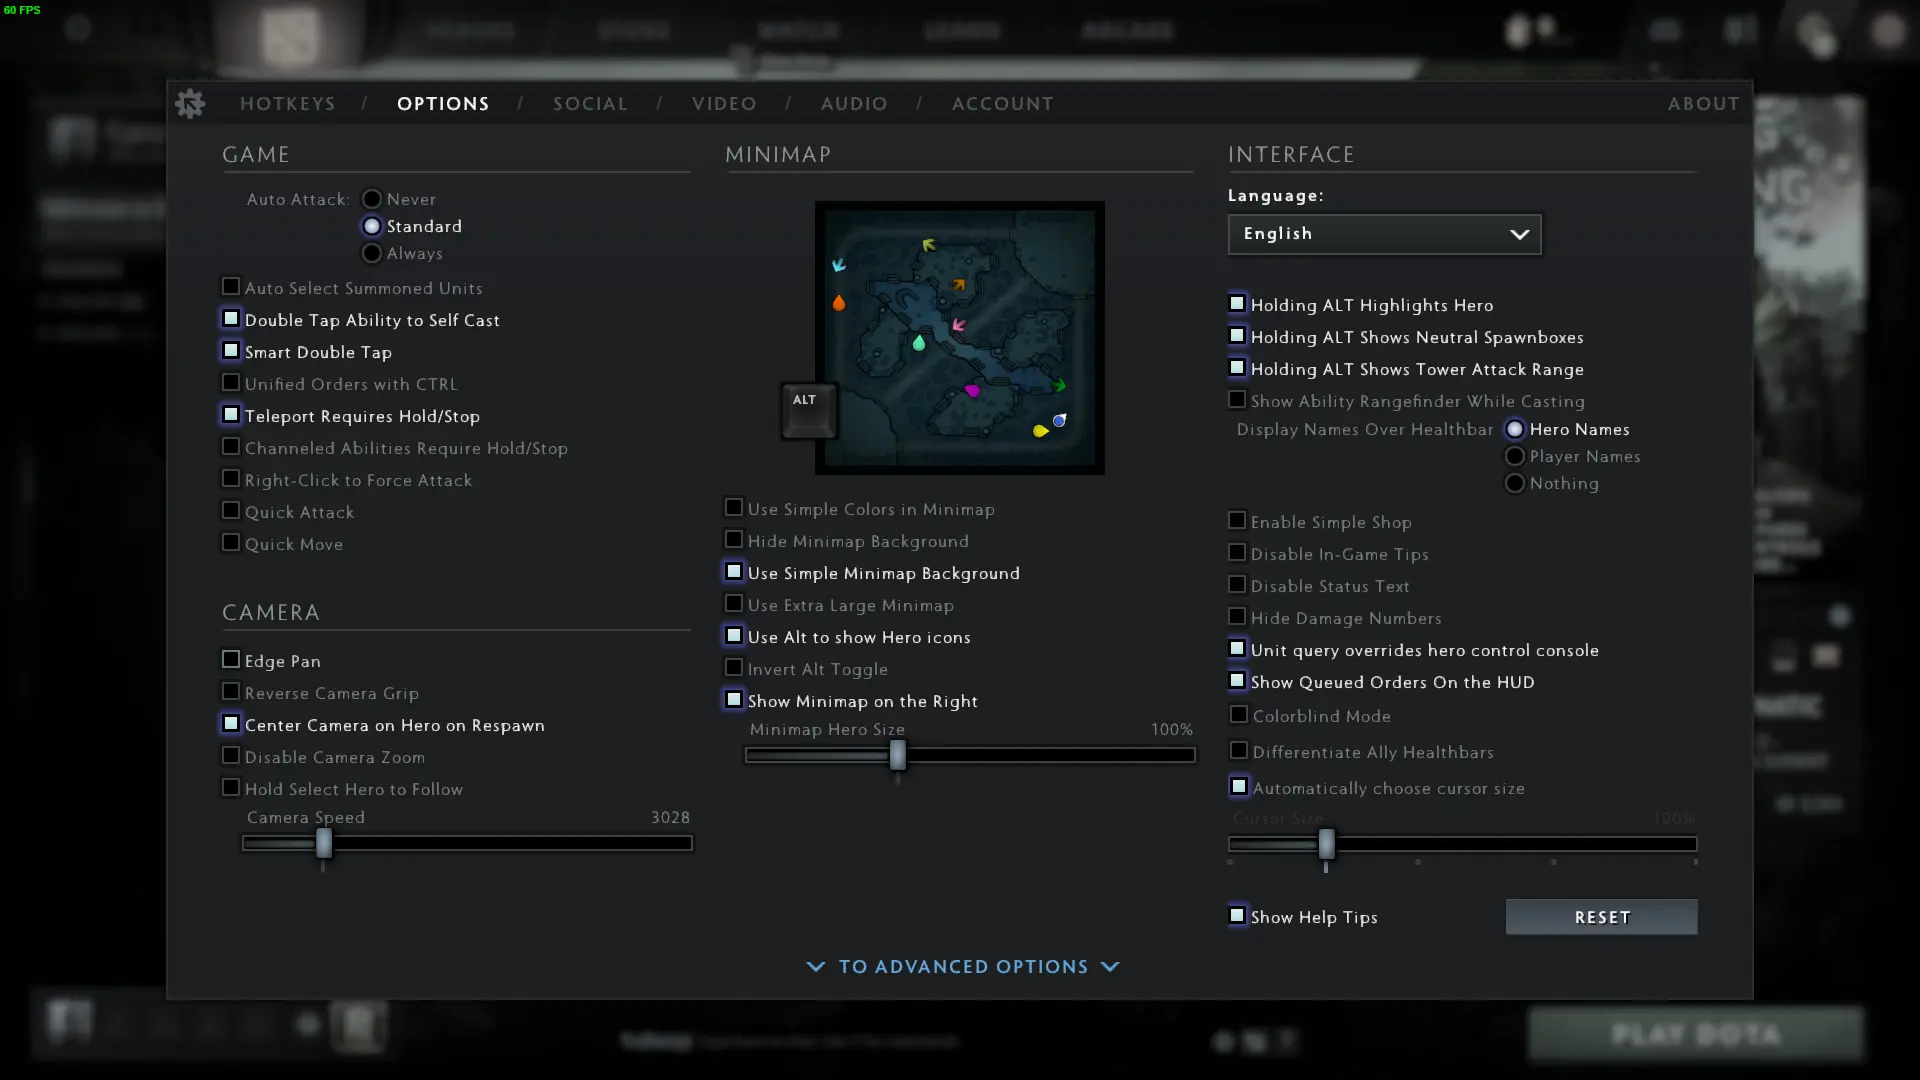 Camera options in DOTA 2, including hold select hero to camera lock and edge pan settings